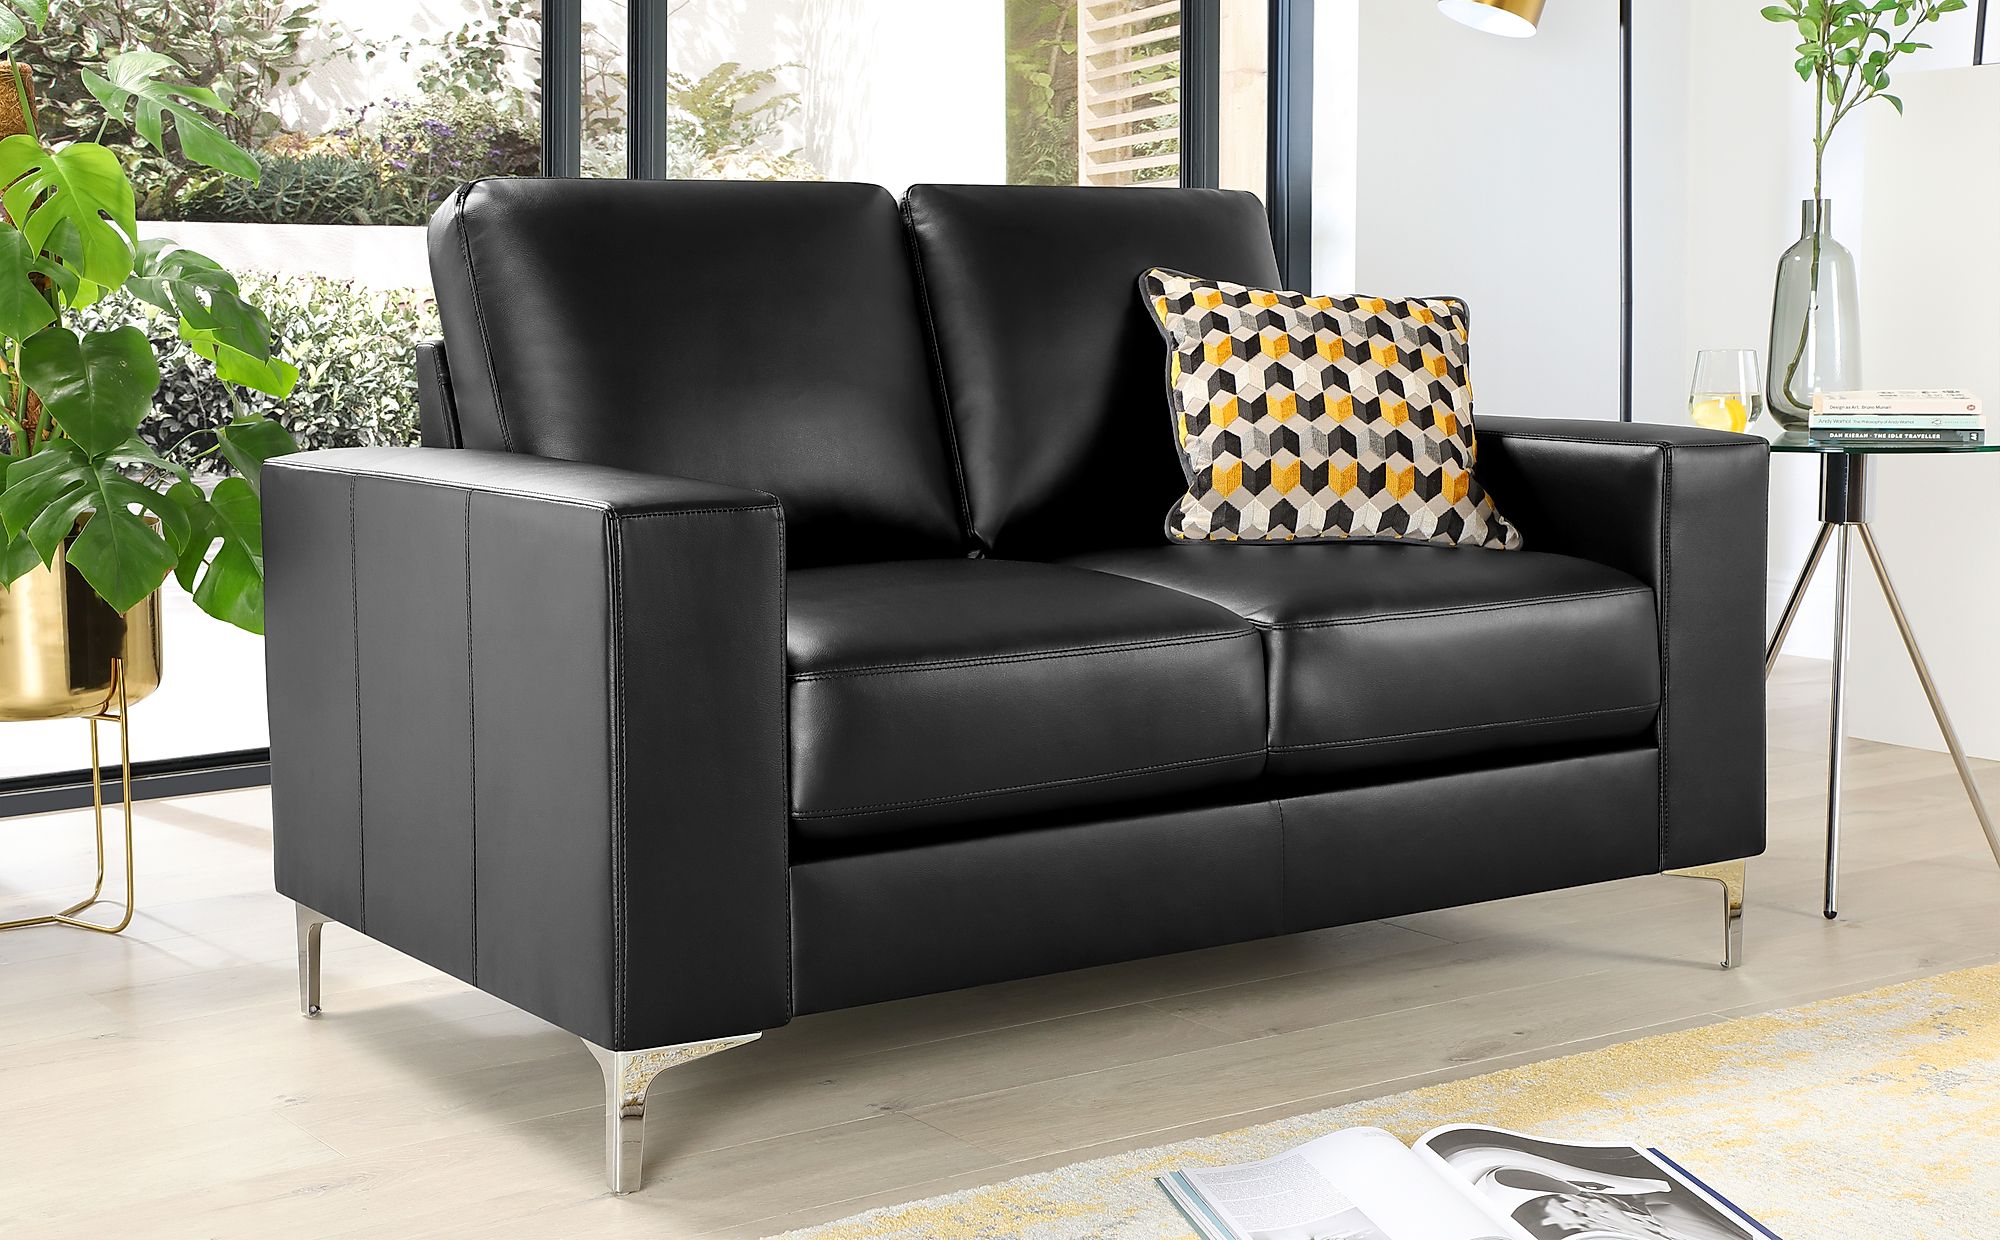 small two seater black leather sofa